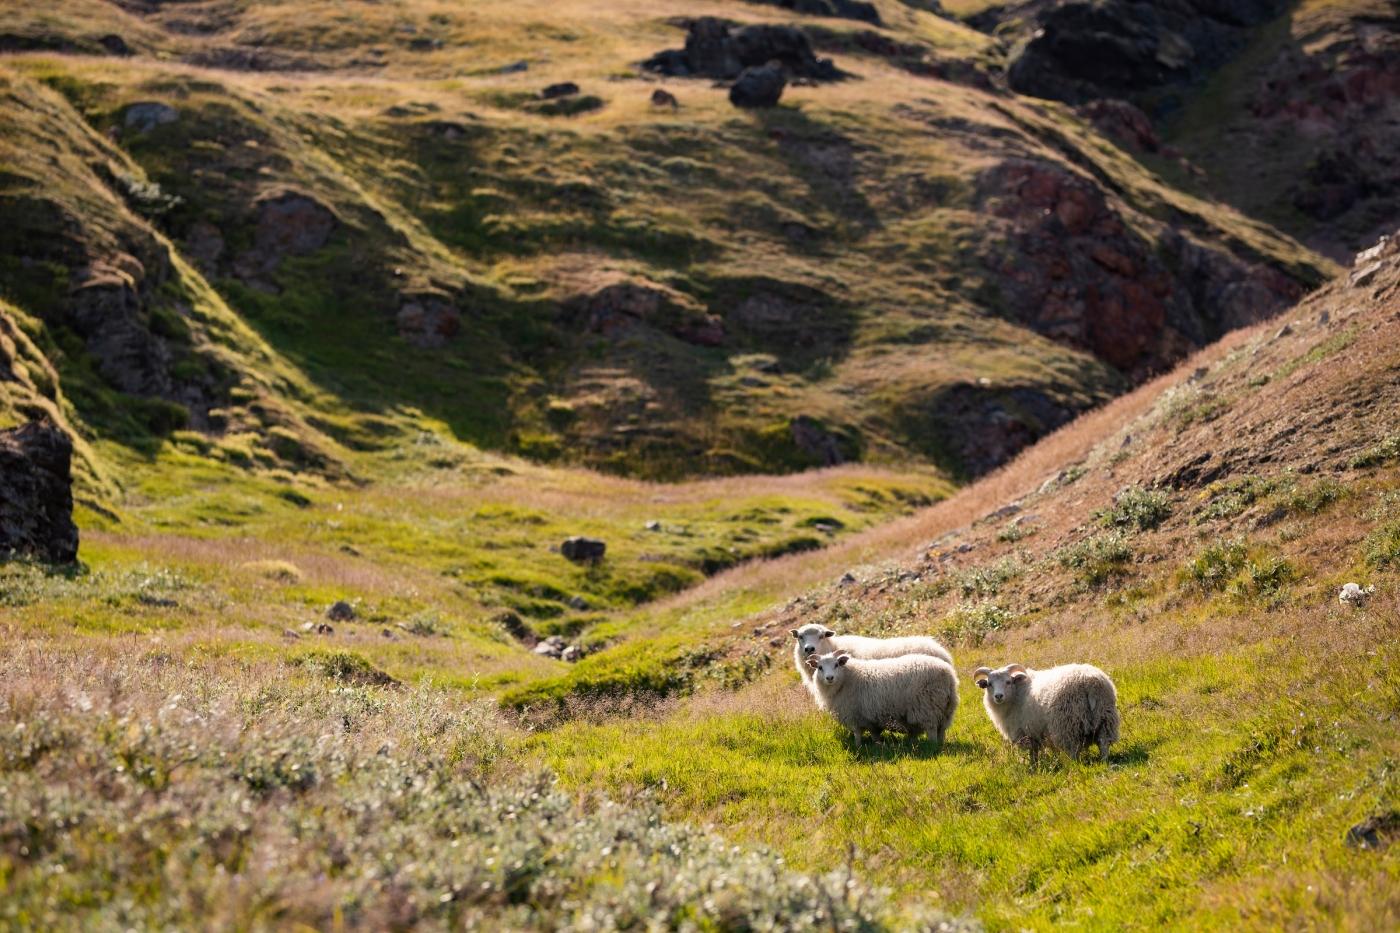 Sheeps in the nature in the South Greenland. Photo by Aningaaq R Carlsen - Visit Greenland